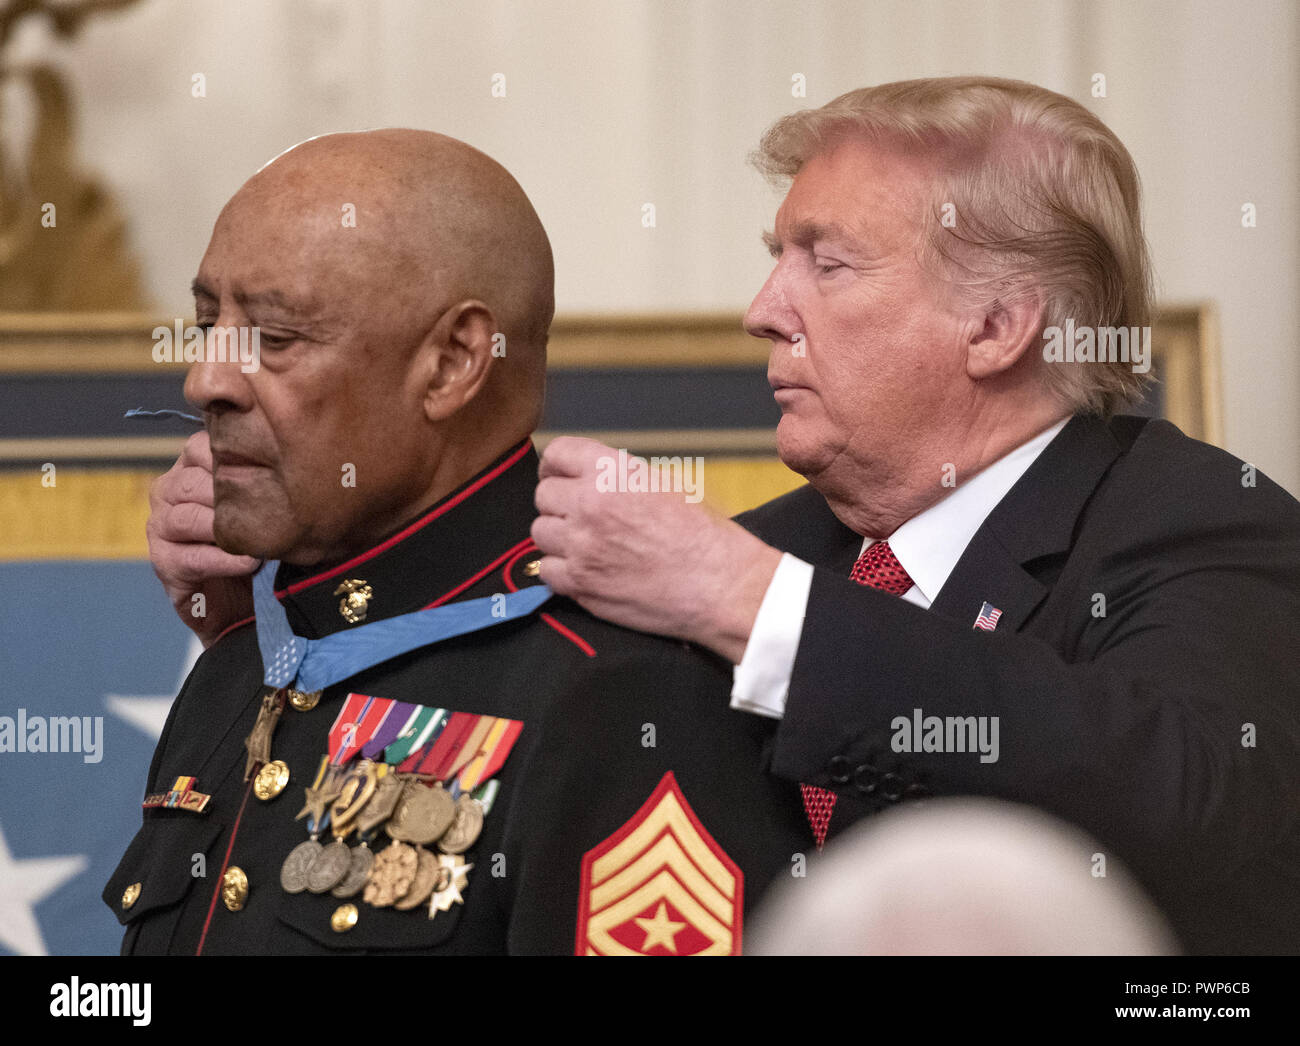 Washington, District of Columbia, USA. 17th Oct, 2018. United States President Donald J. Trump awards the Medal of Honor to Sergeant Major John L. Canley, United States Marine Corps (Retired), for conspicuous gallantry during the Vietnam War in a ceremony in the East Room of the the White House in Washington, DC on Wednesday, October 17, 2018 Credit: Ron Sachs/CNP/ZUMA Wire/Alamy Live News Stock Photo